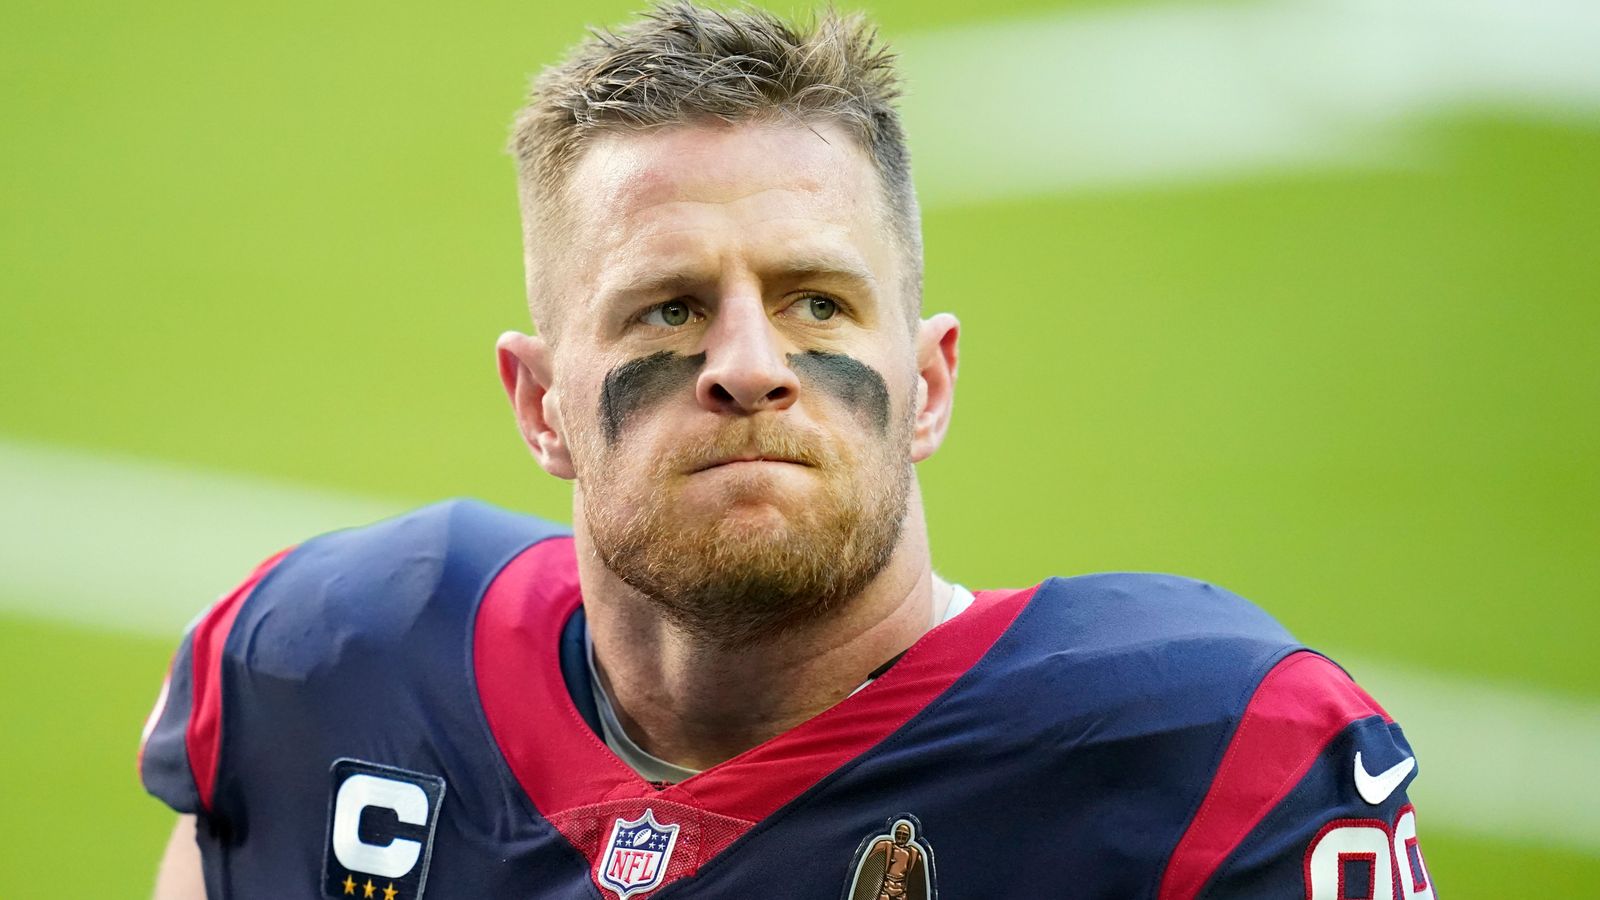 Arizona fans can 'turn down for Watt' with this new t-shirt